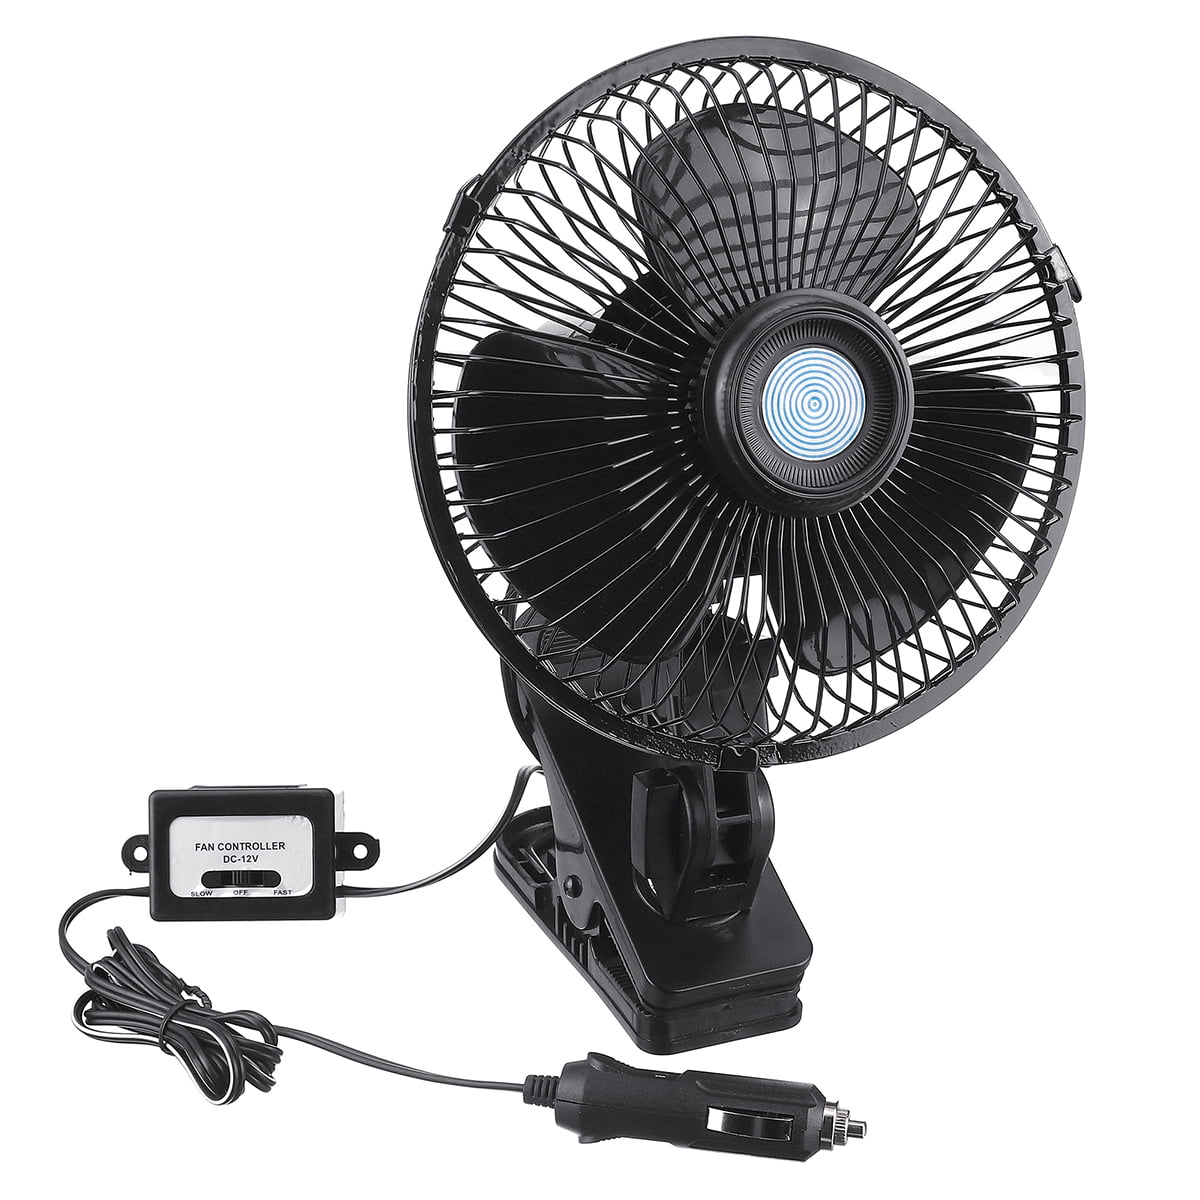 Fits Usb Cooling Fan Ventilator Car Van Home Office 3 Stage Quiet Powerful 